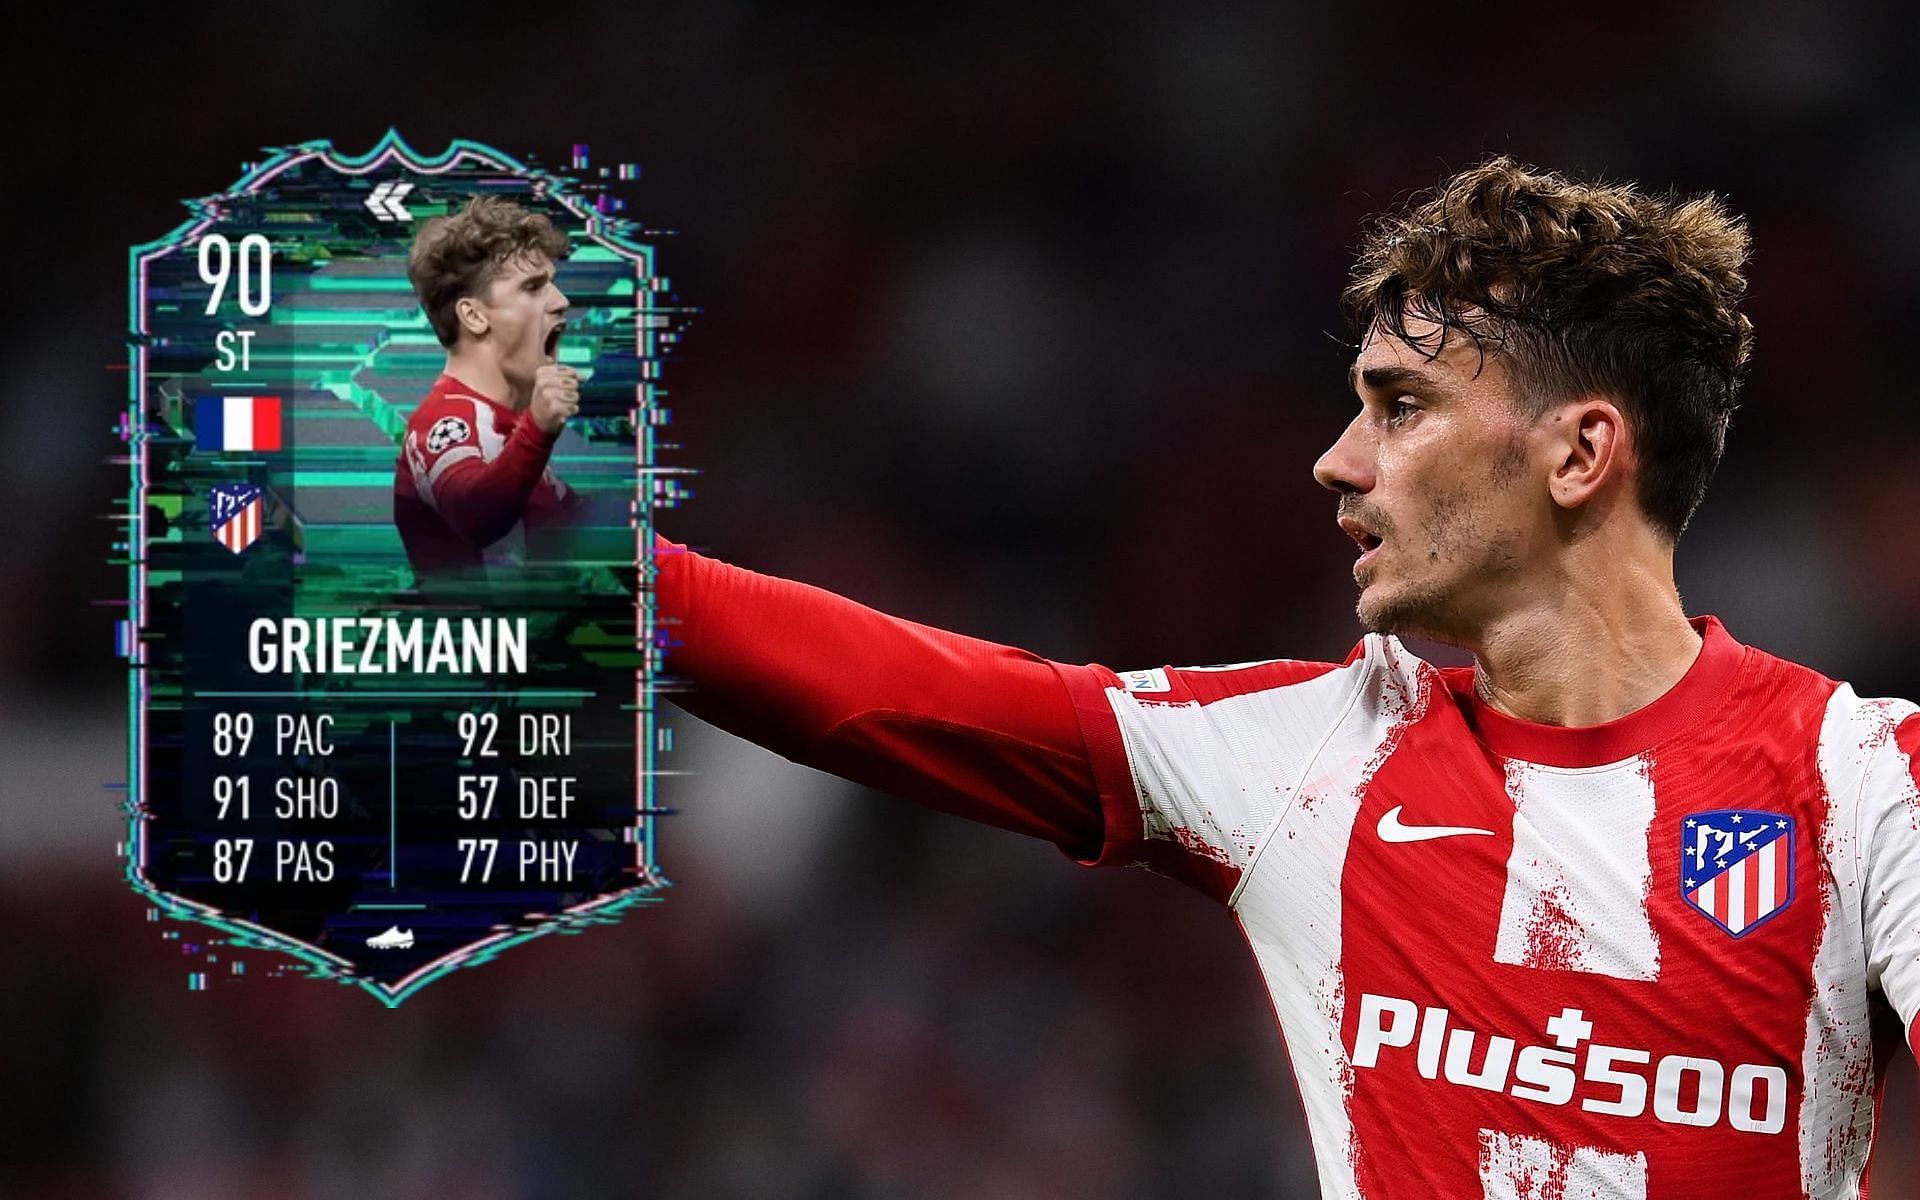 FIFA 22 Ultimate Team: How to complete Antoine Griezmann Flashback SBC in FUT 22